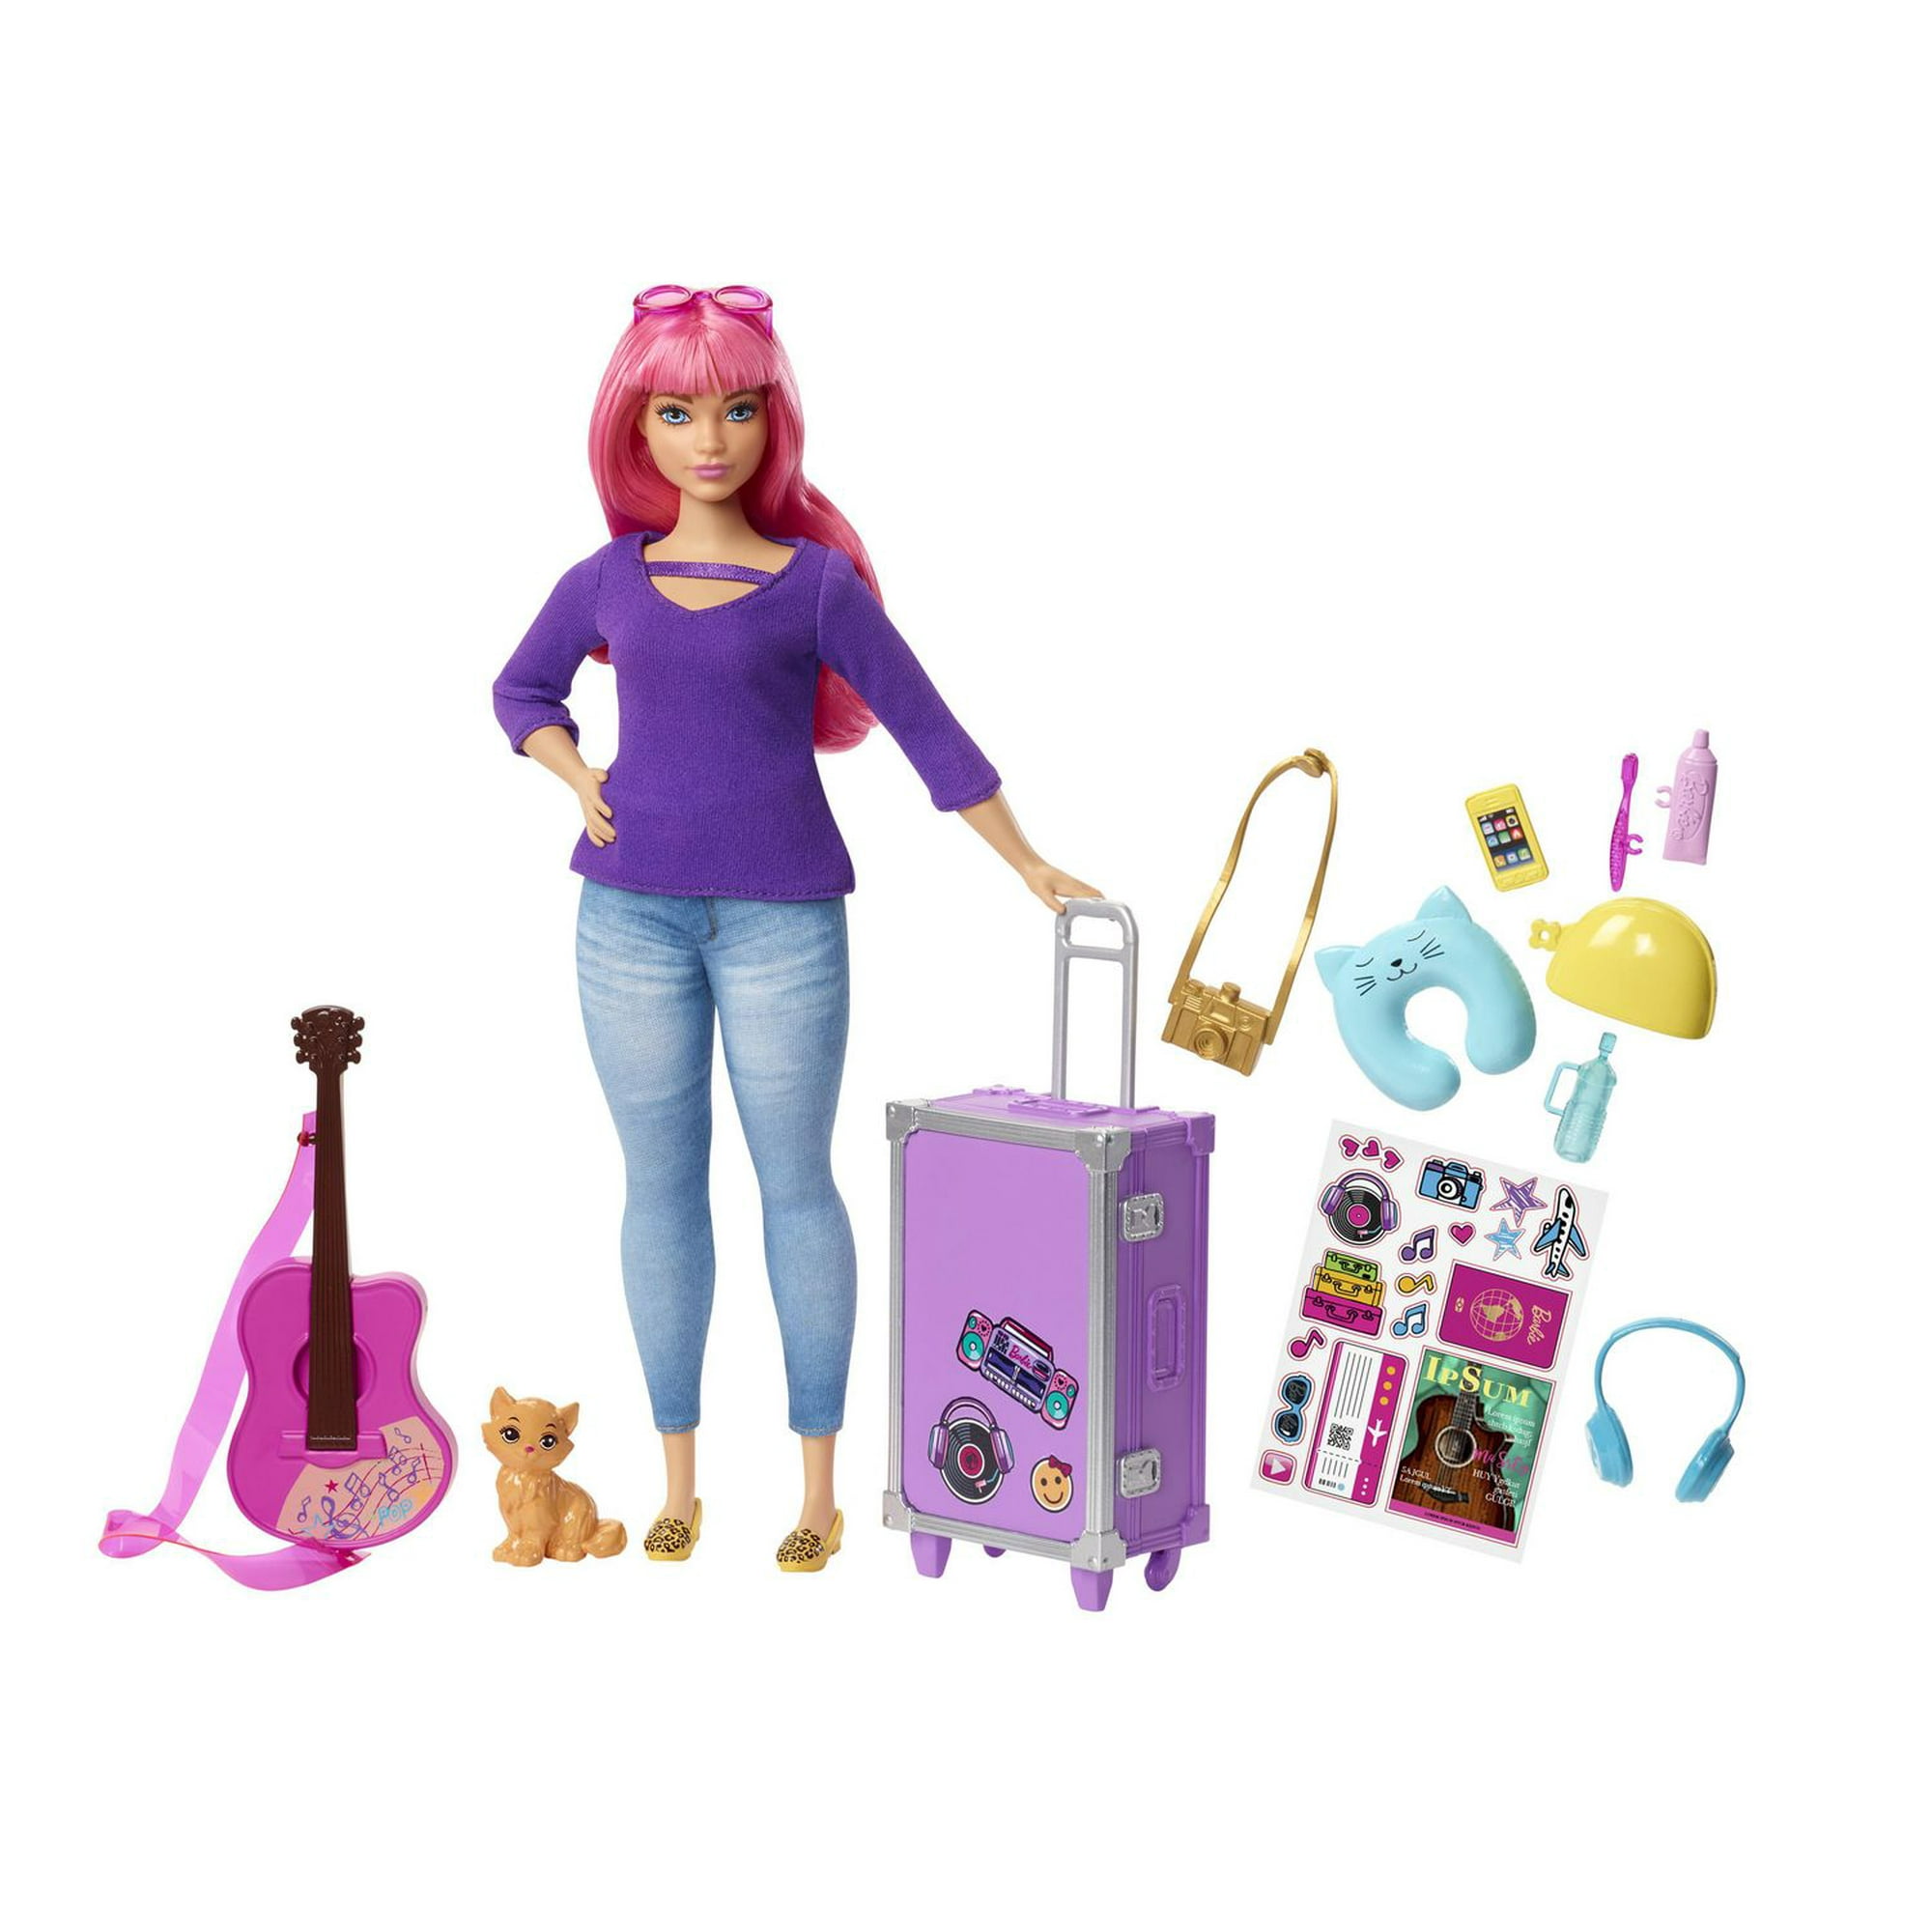 Barbie Daisy Doll with Kitten, Luggage, Guitar & Travel Accessories -  Walmart.com